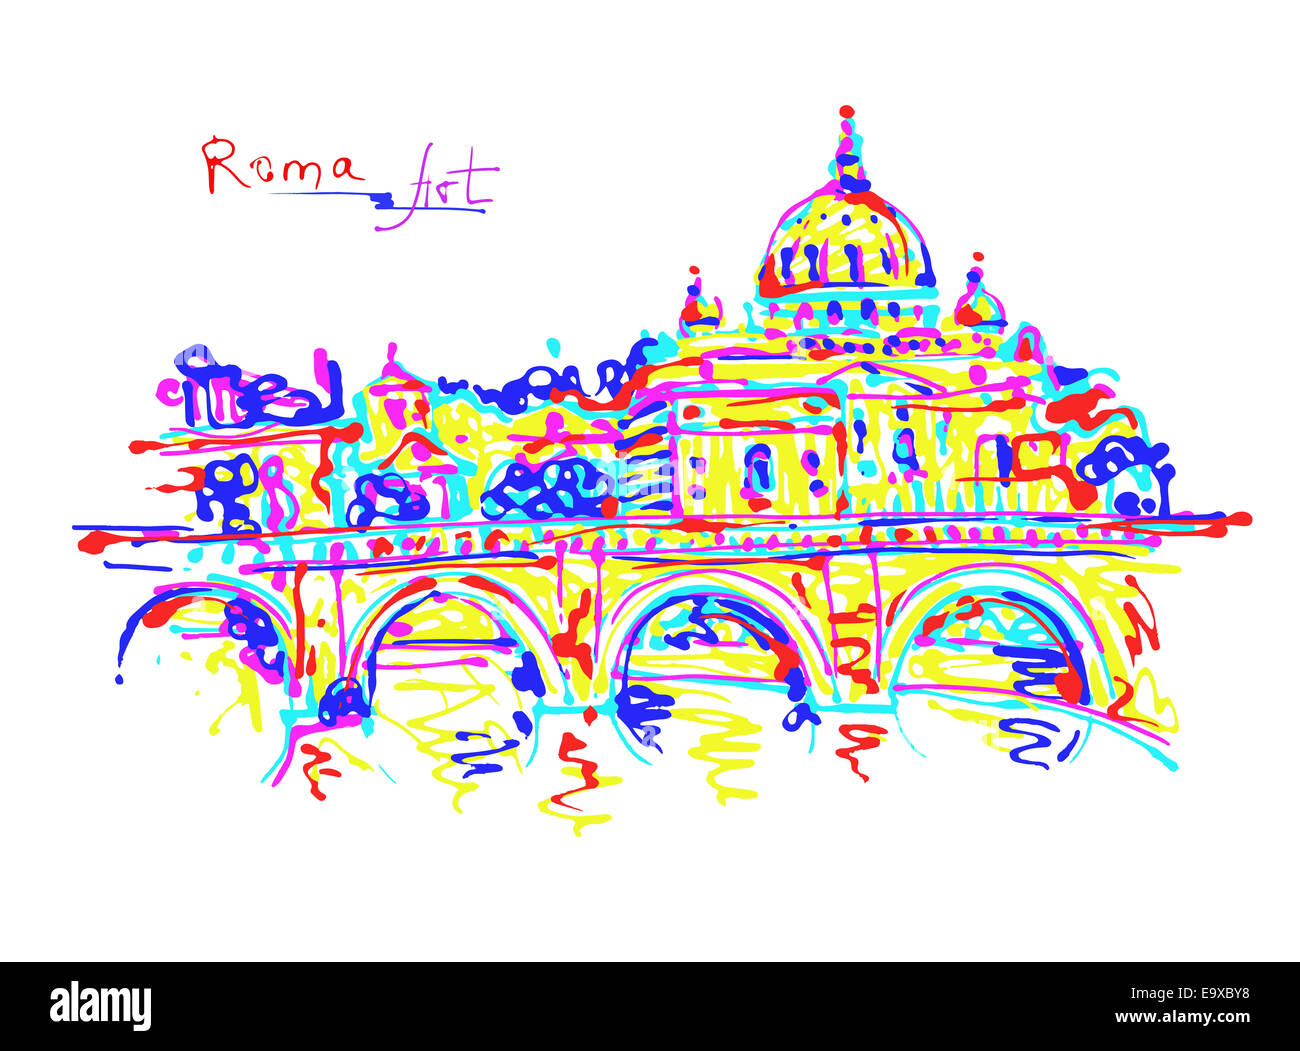 famous place of Rome Italy, original drawing in rainbow colours Stock Photo